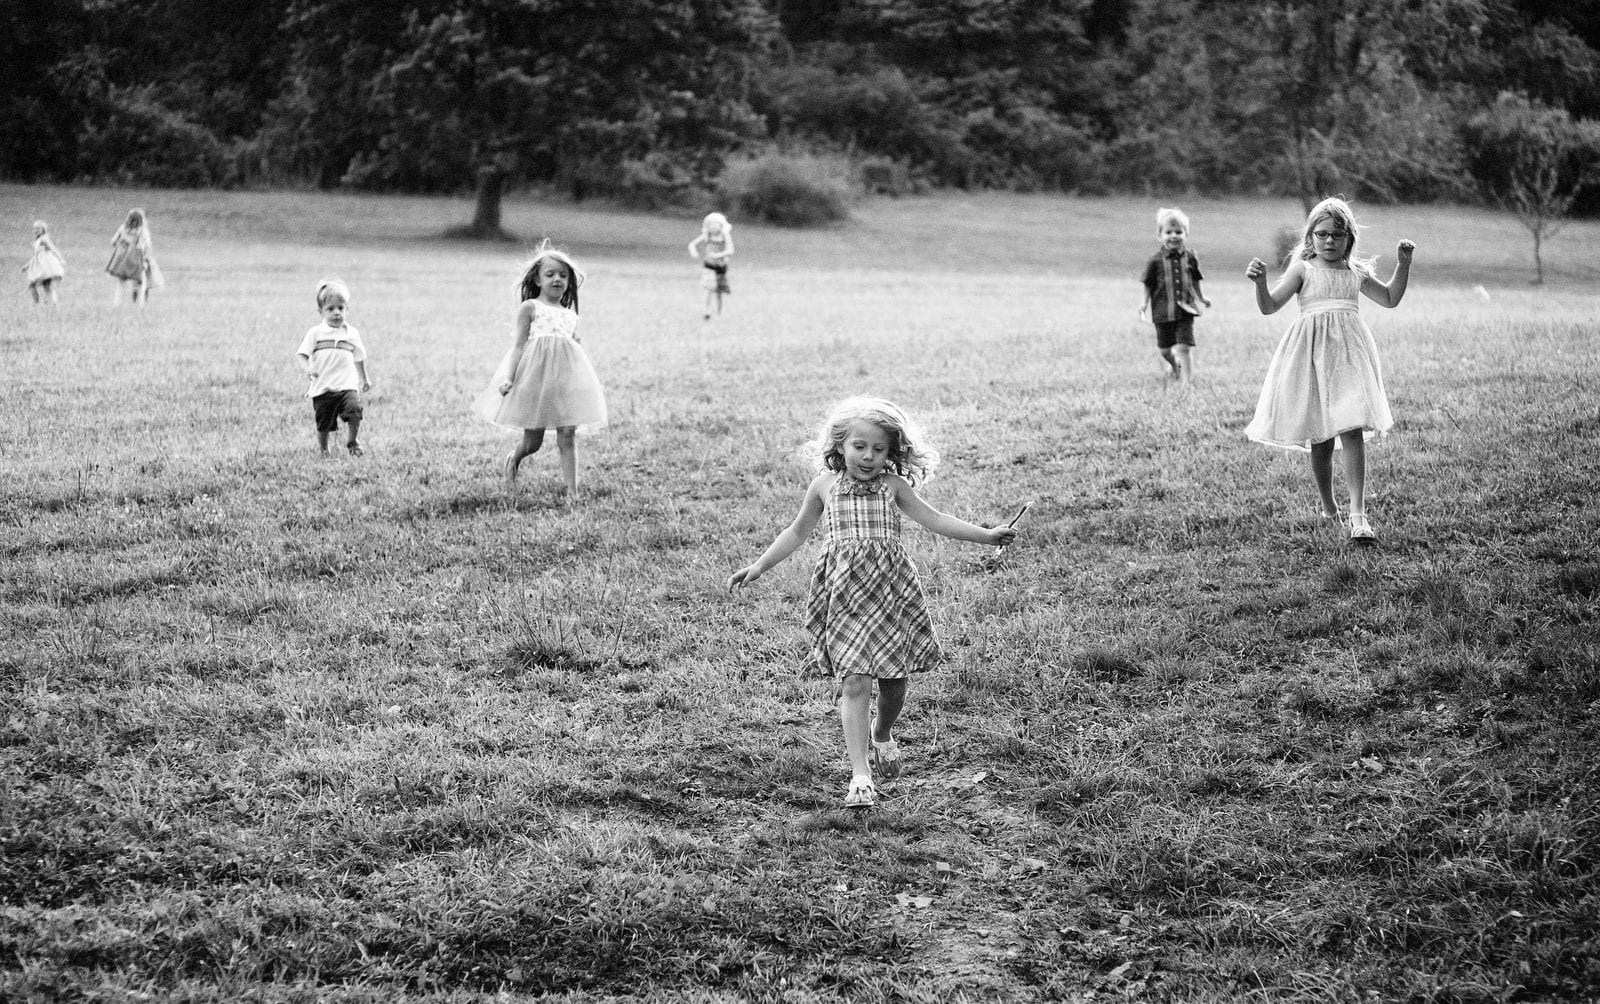 A group of children run down a grassy hill during a wedding at Chanteclaire Farm.